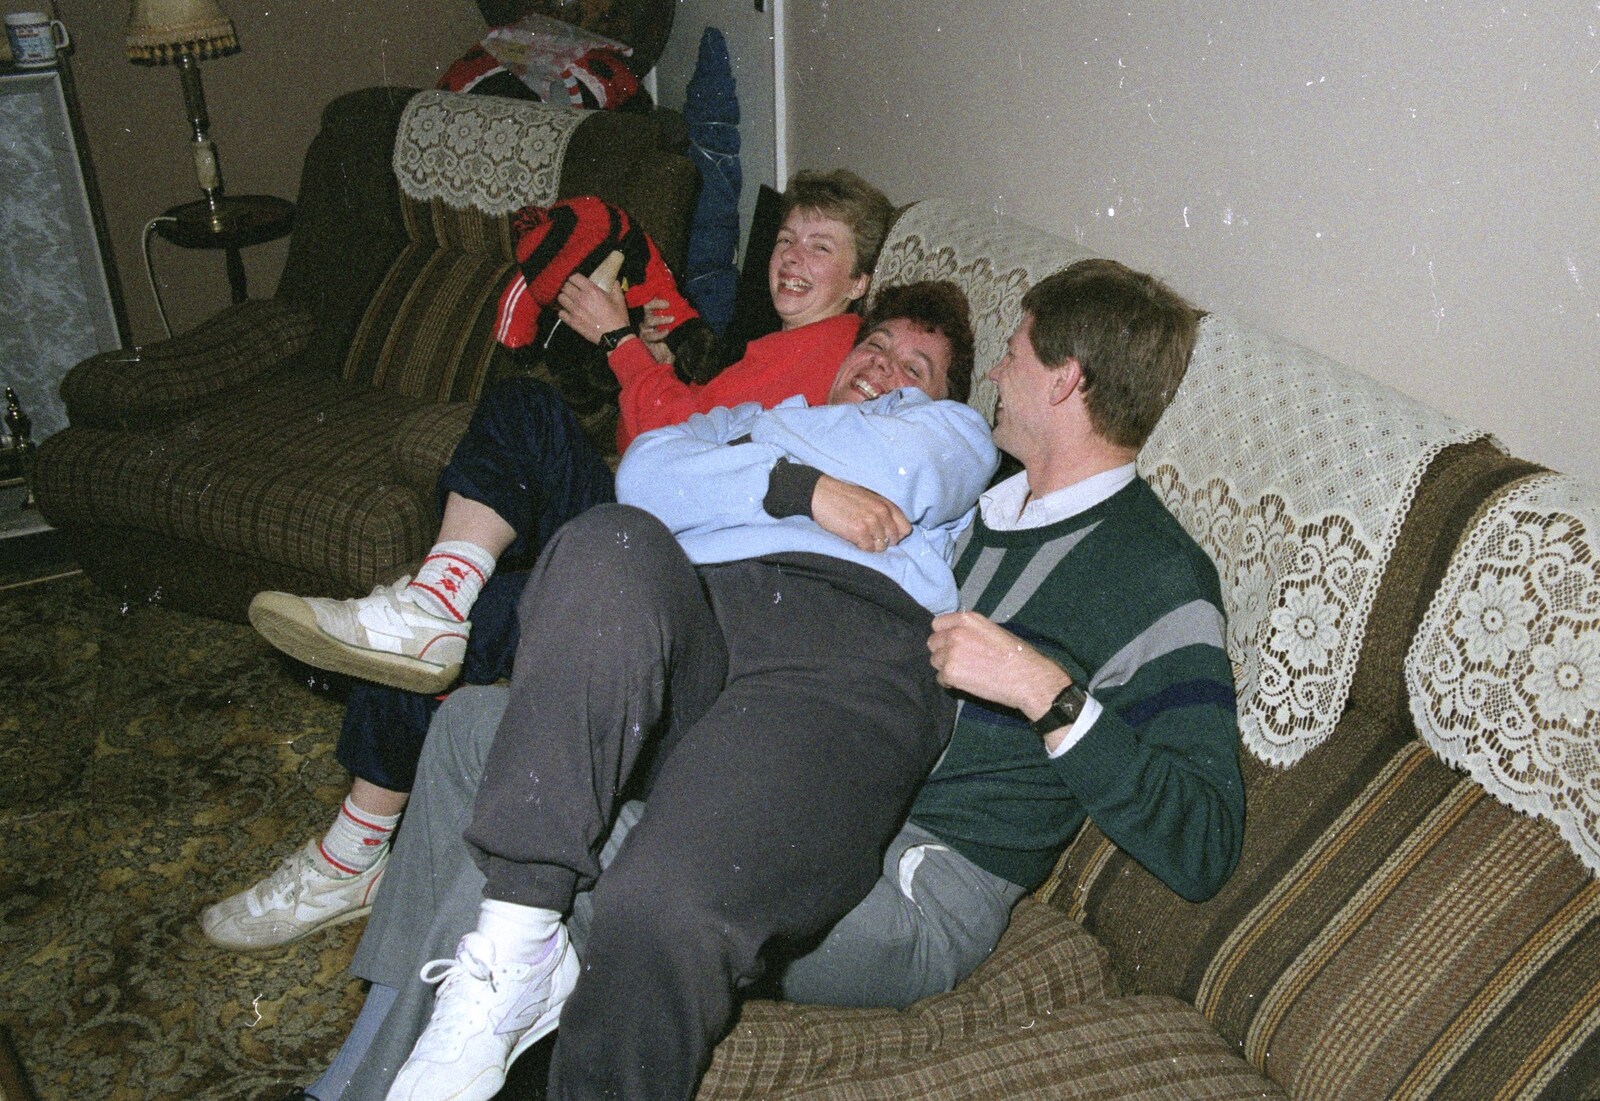 Theresa, Crispy and Steve-O in a heap from An "Above The Laundrette" Barbeque, Diss, Norfolk - 28th May 1990